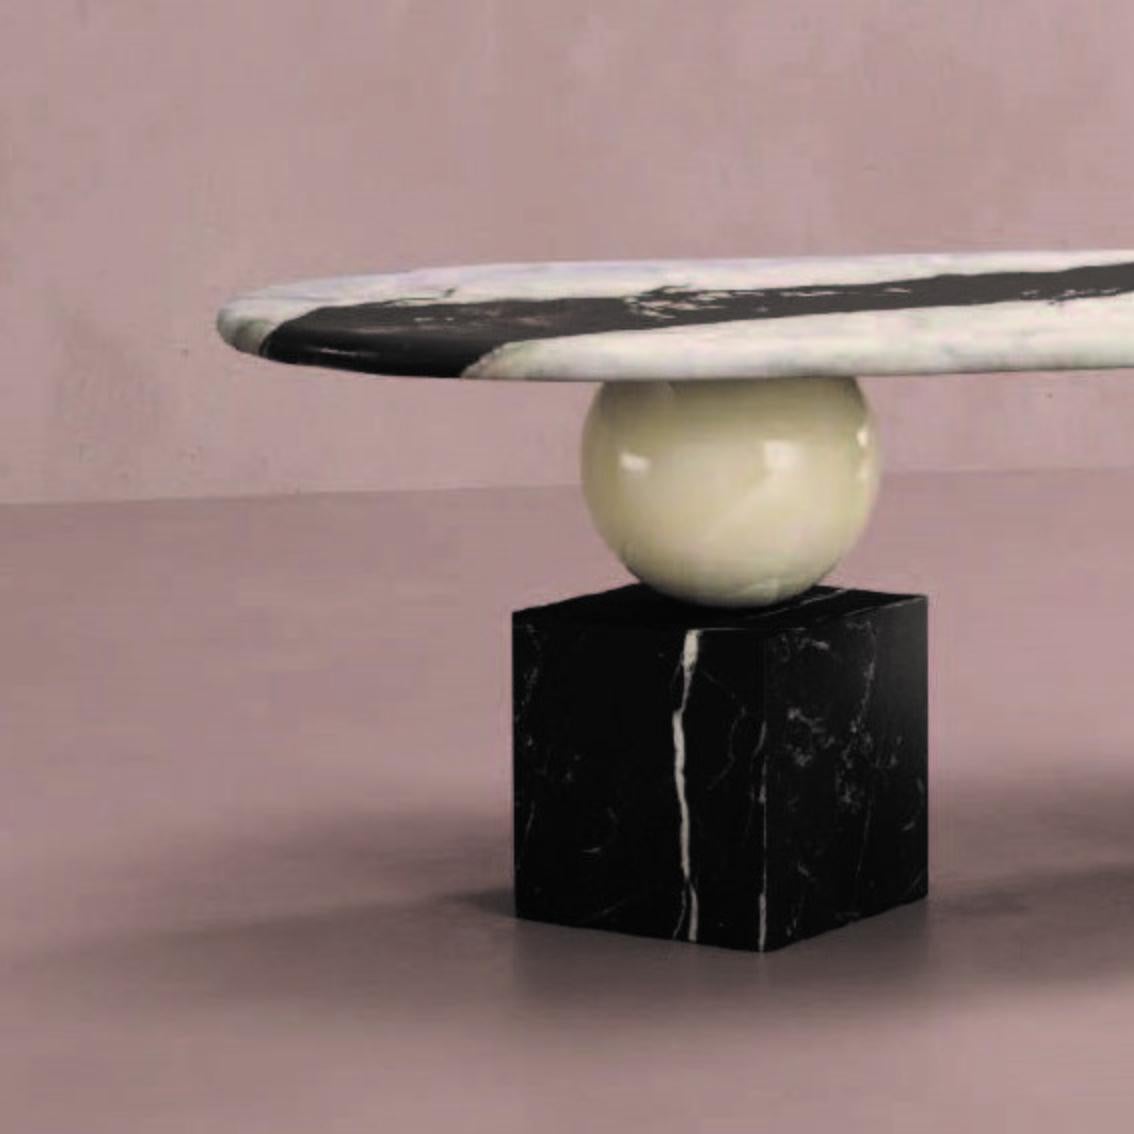 Balance dining table by Pilar Zeta
Materials: Marble, onyx, metal.
Dimensions: W 200 x D 100 x H 76 cm.
Weight: 450 kg.

Marble and onyx dinner table in black, white and green. Marble, onyx and metal structure.

Argentinian-born artist Pilar Zeta